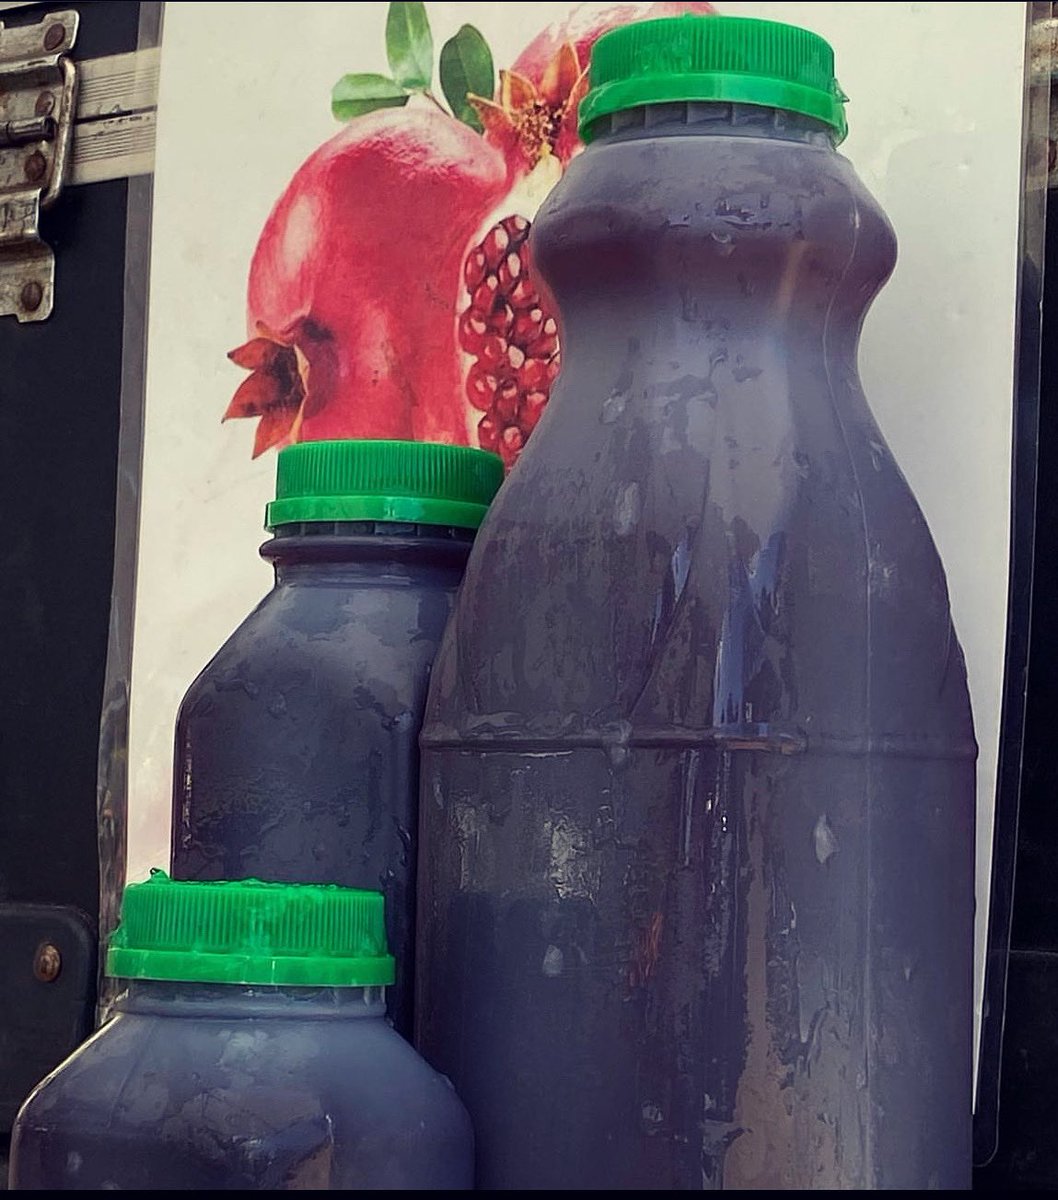 Make sure to get your pomegranate juice from our stand in this Thursdays market before it runs out. Amazing taste with no added sugar nor water. It can even be put in the freezer for whenever you need it. Get yours this week #southpasadena #pomegranate #juice #antioxidants